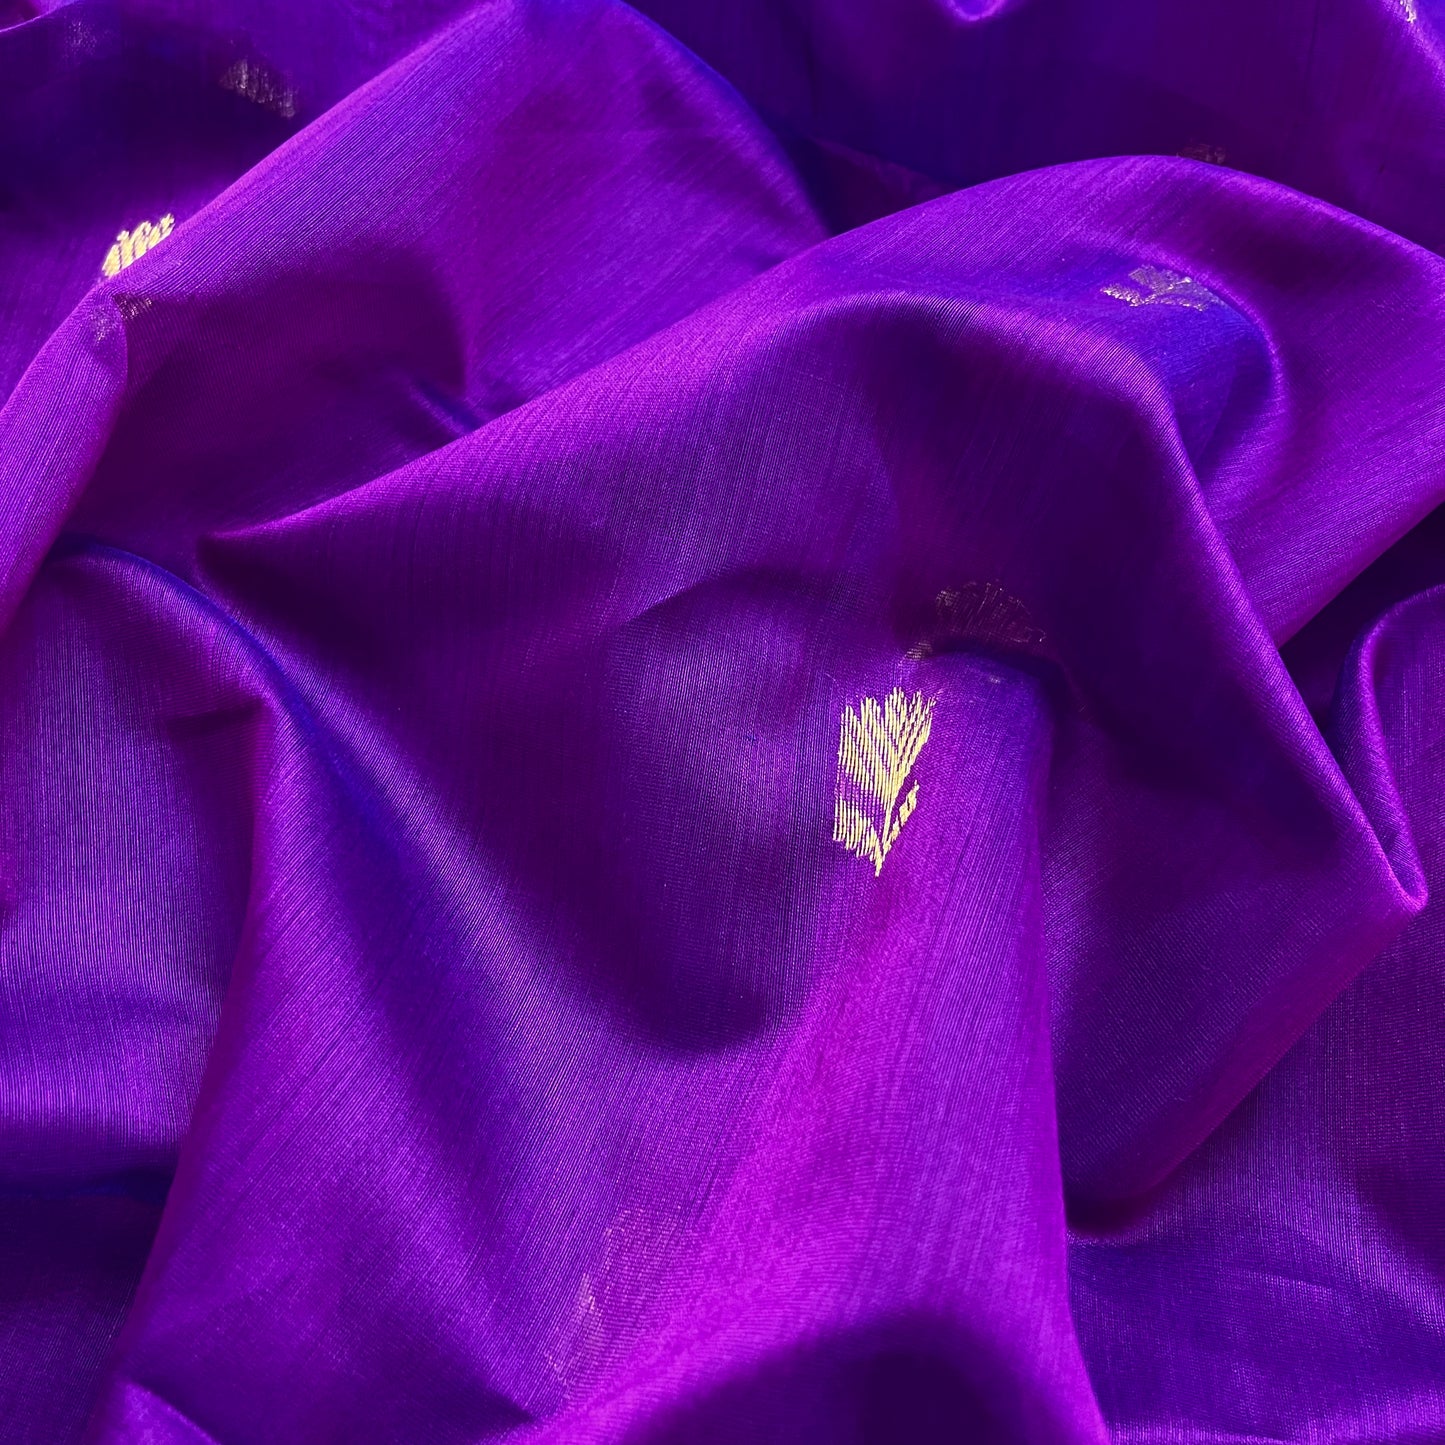 Violet dual tone maheshwari saree with flower motifs all over